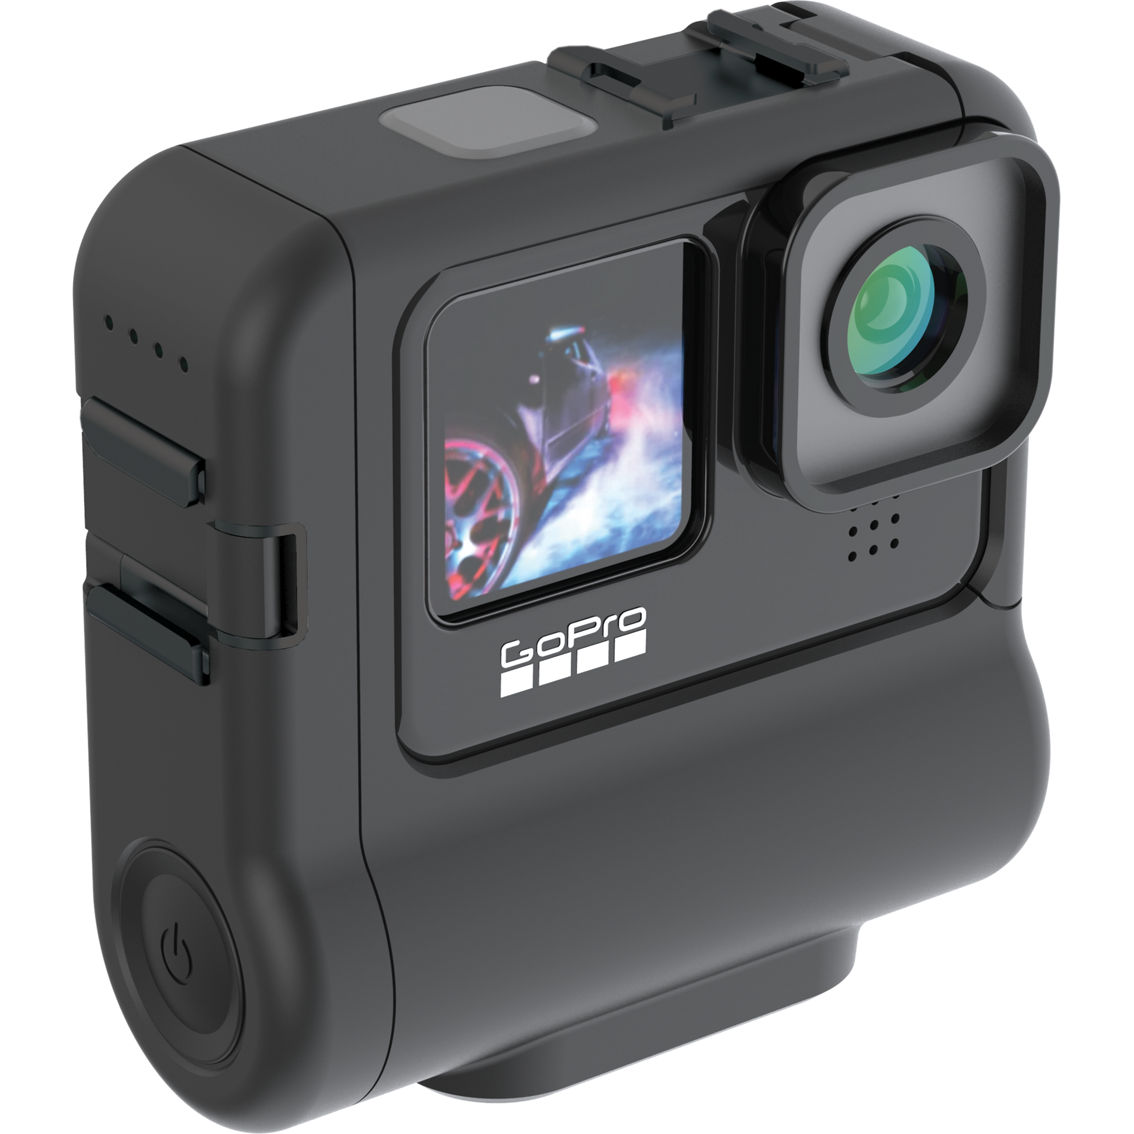 Digipower Re-Fuel 9 hr. Extended Battery Case for GoPro HERO - Image 2 of 5